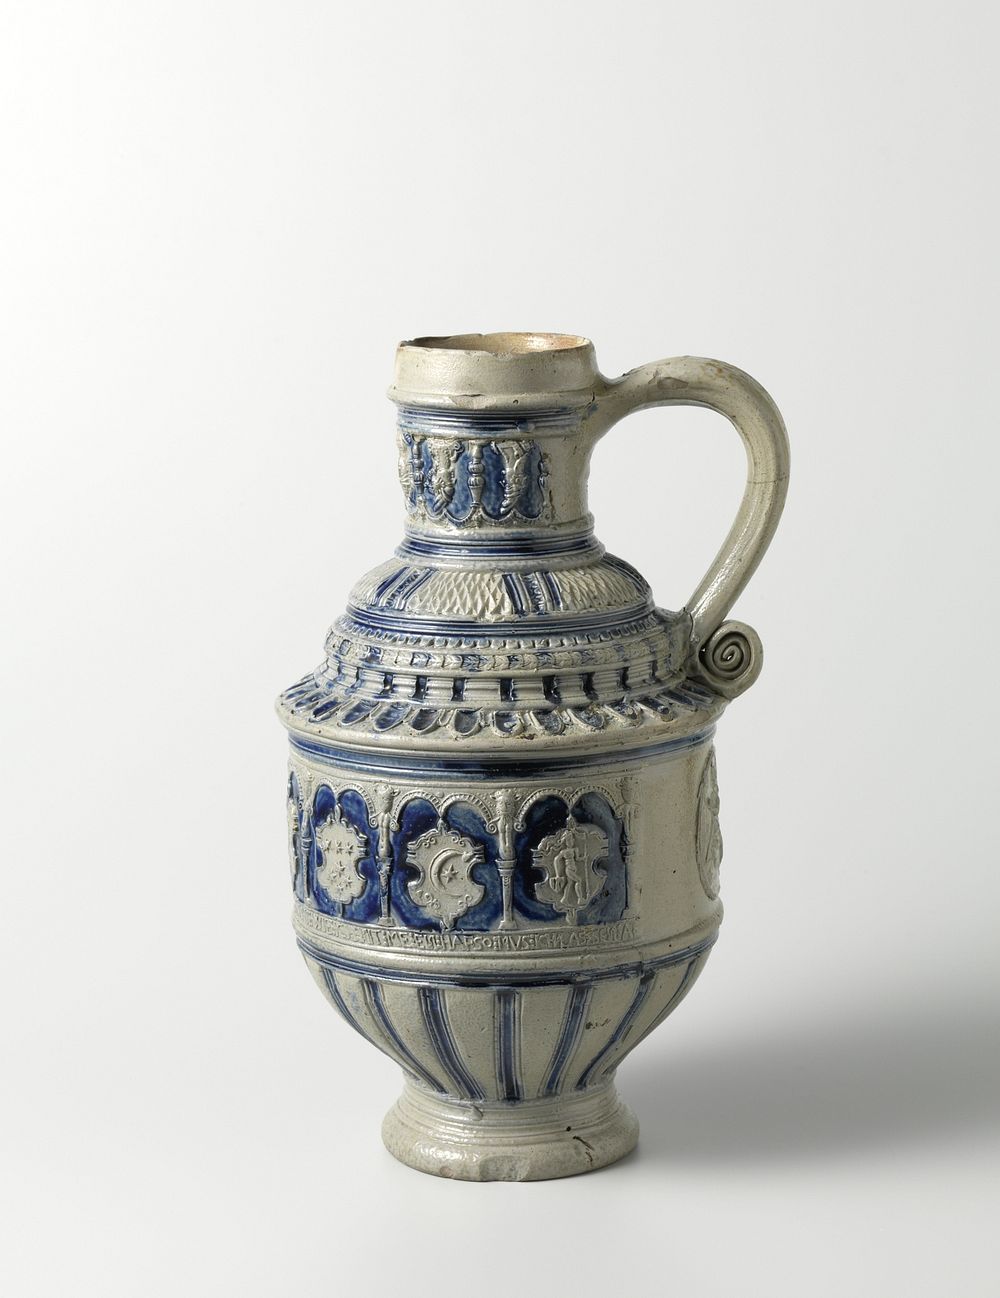 Jug with coats of arms beneath arches (1596) by anonymous